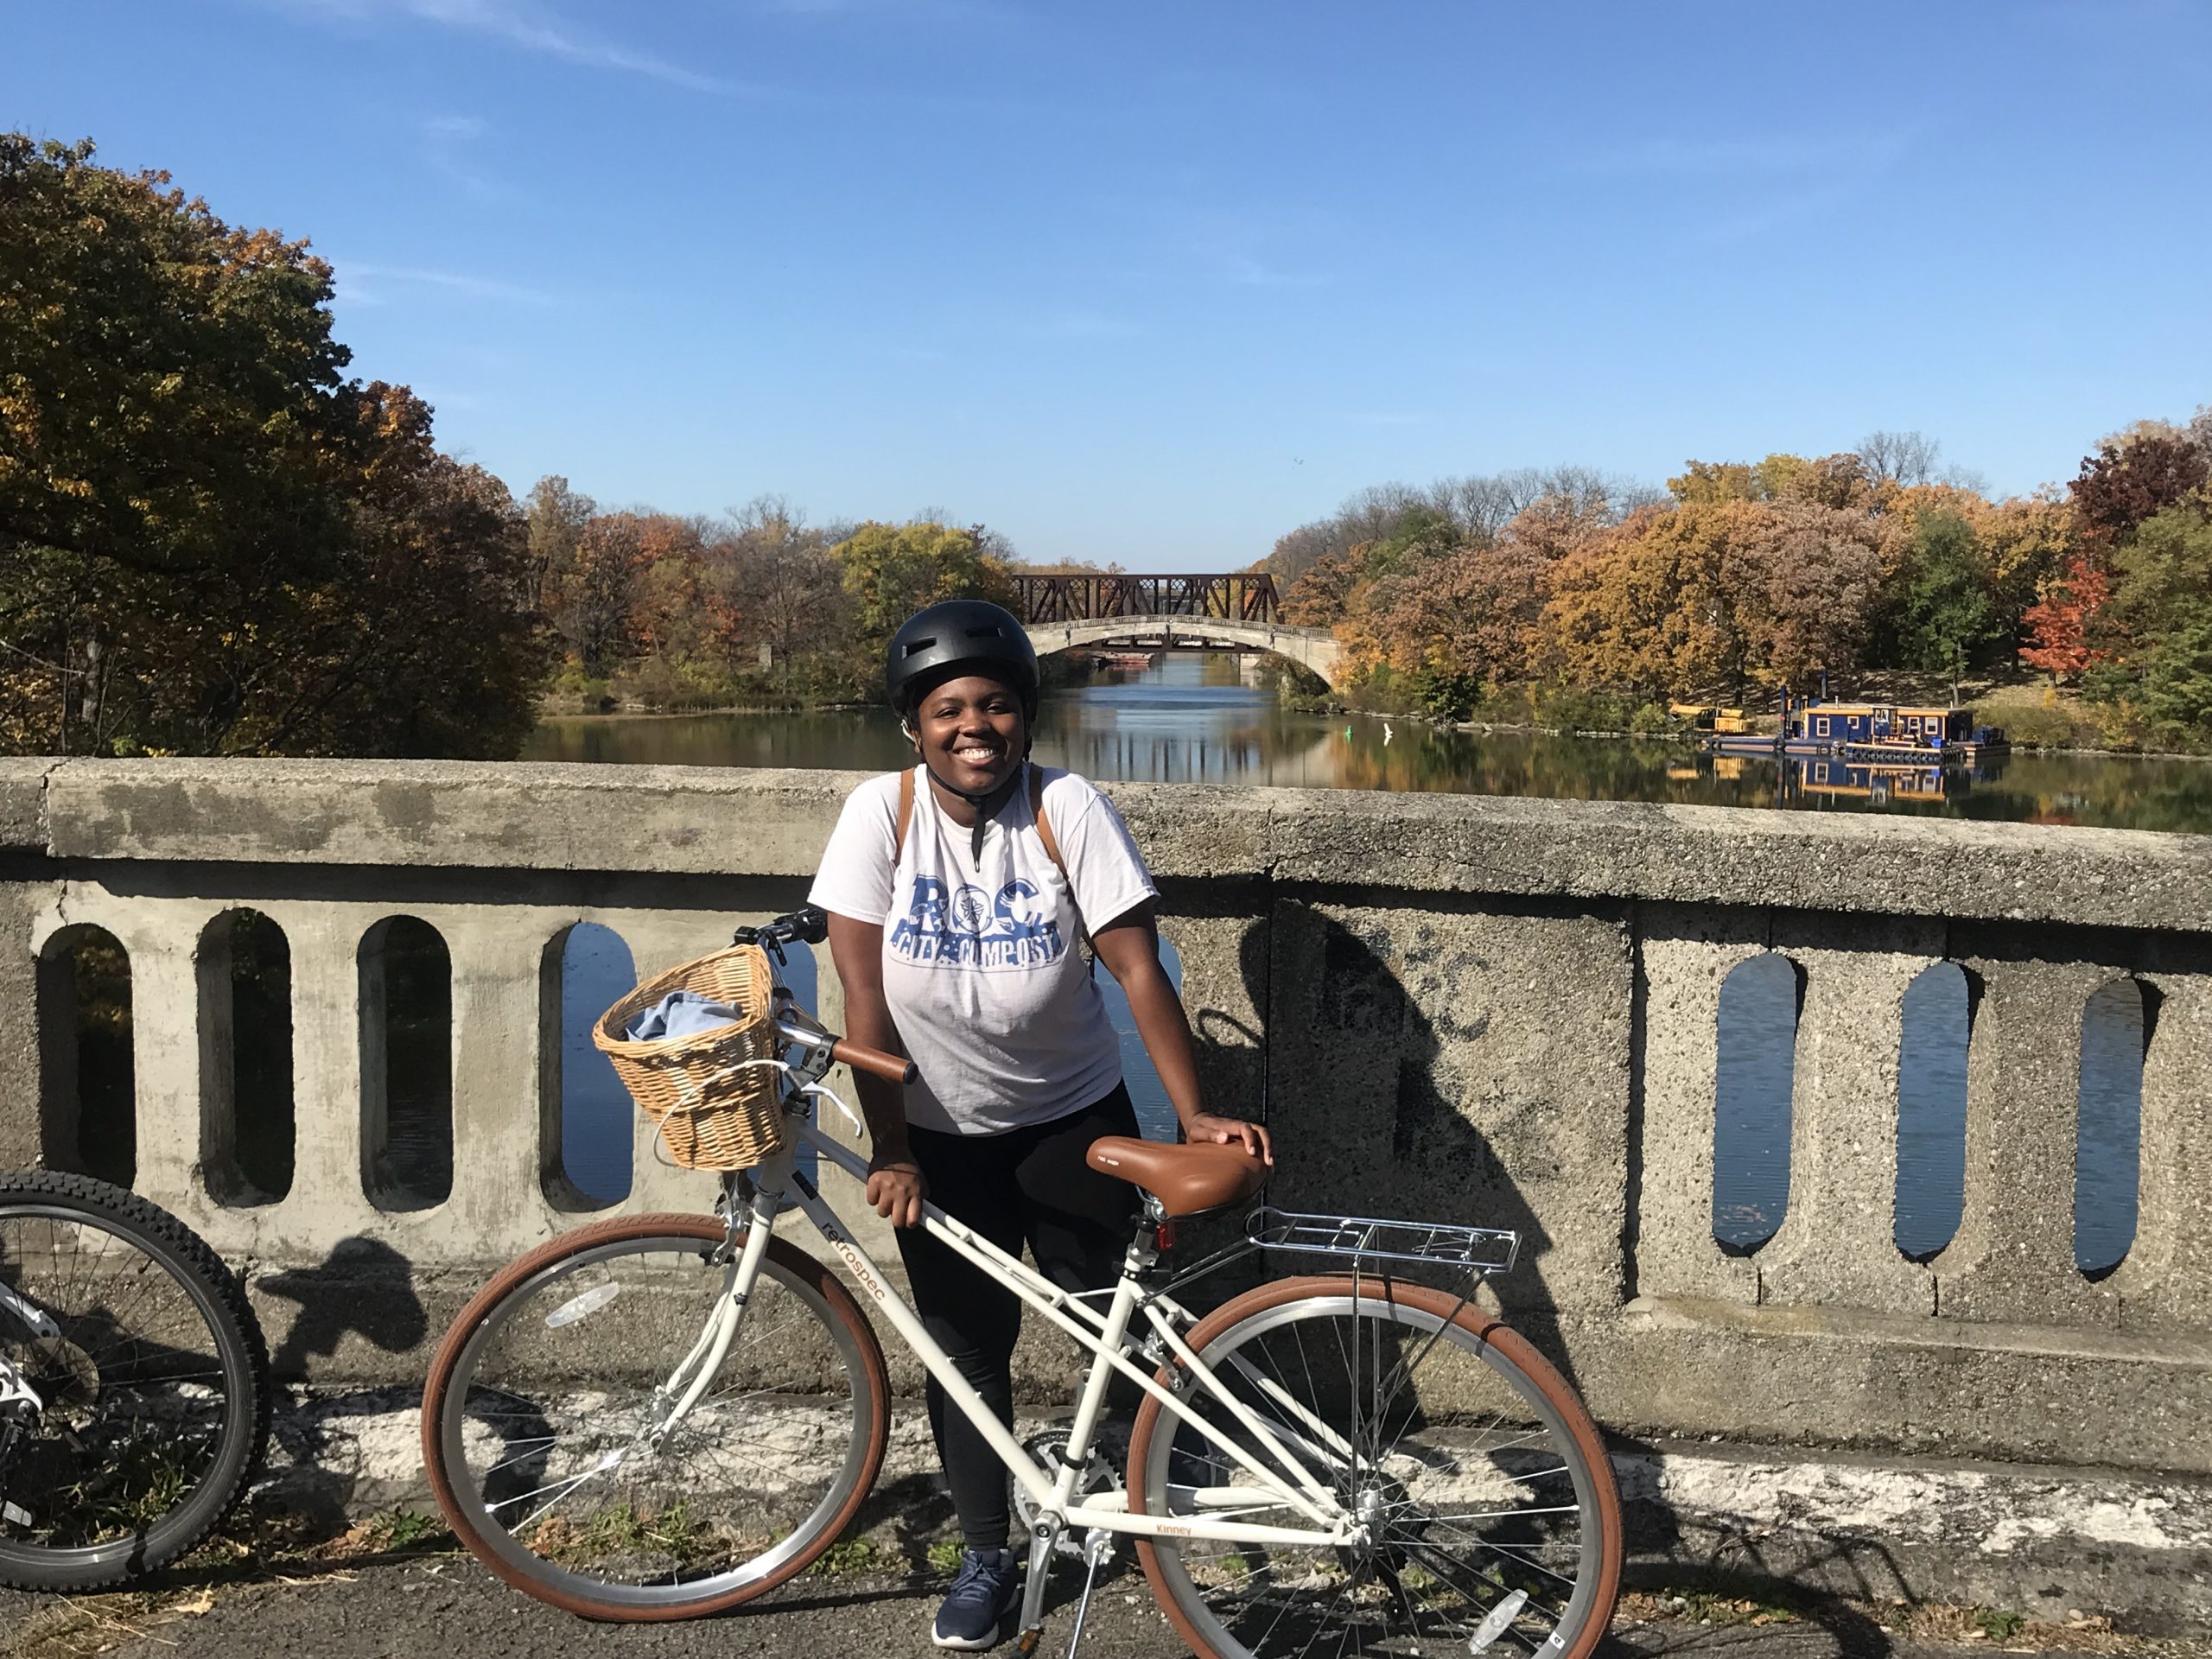 Jahasia with her bike at Genessee Valley Park